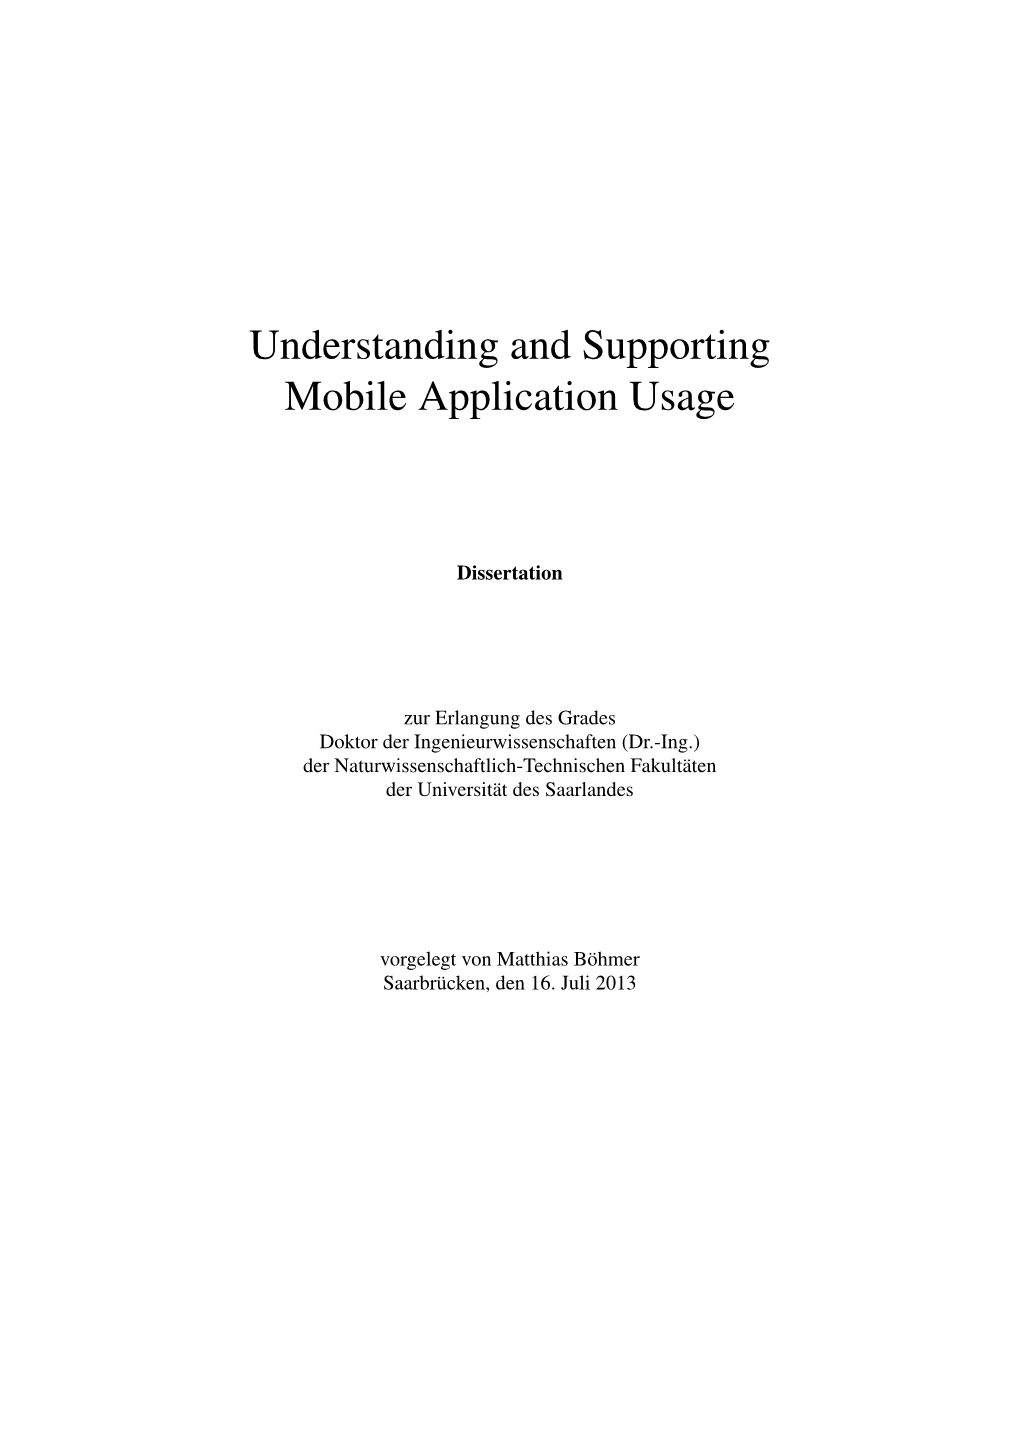 Understanding and Supporting Mobile Application Usage